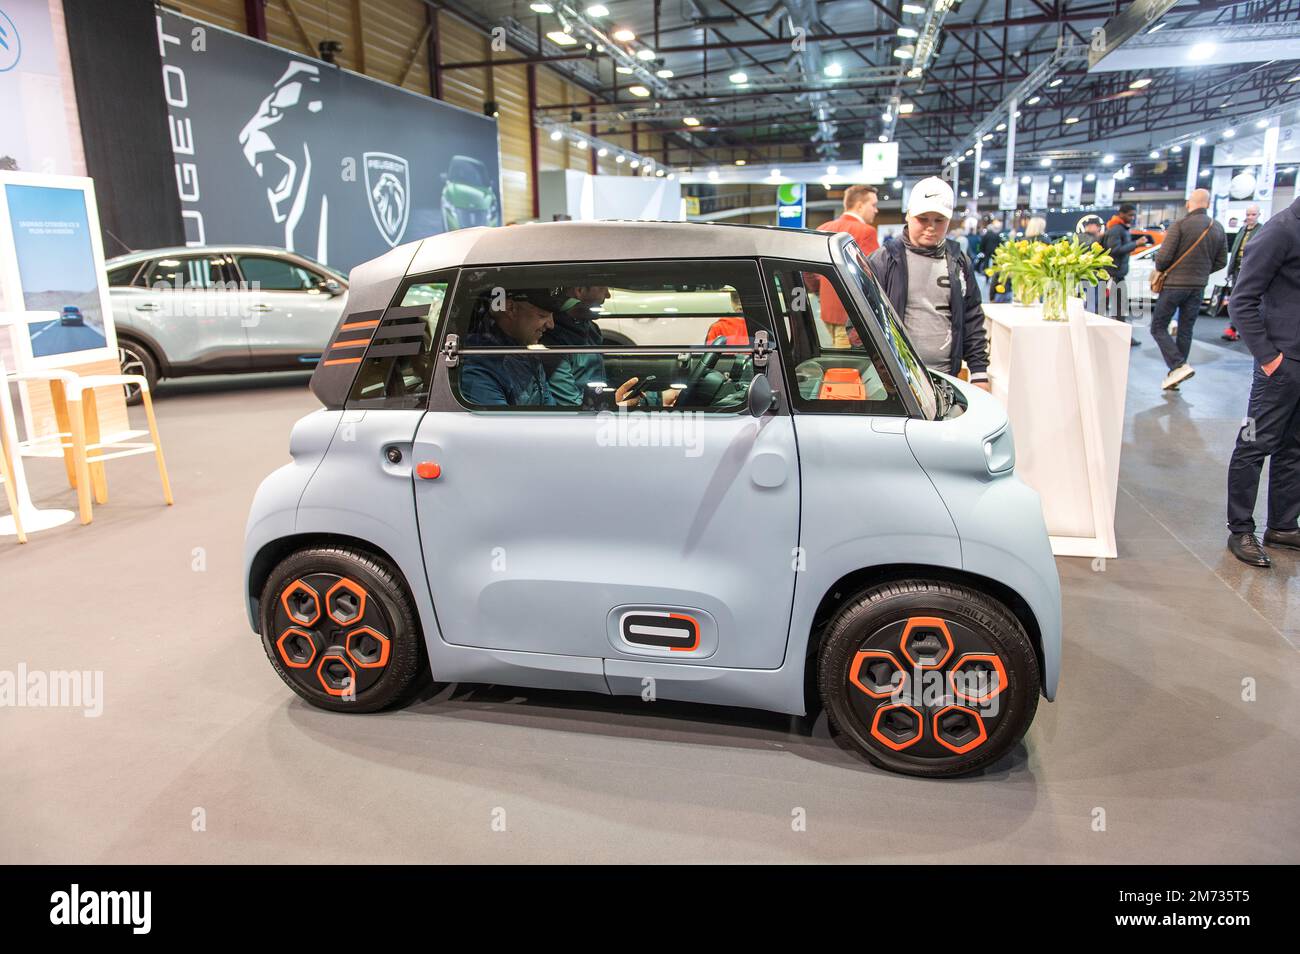 https://c8.alamy.com/comp/2M735T5/rigalatvia-april-29-2022-people-are-enjoying-about-french-small-citroen-ami-electric-two-seater-micro-city-car-2M735T5.jpg